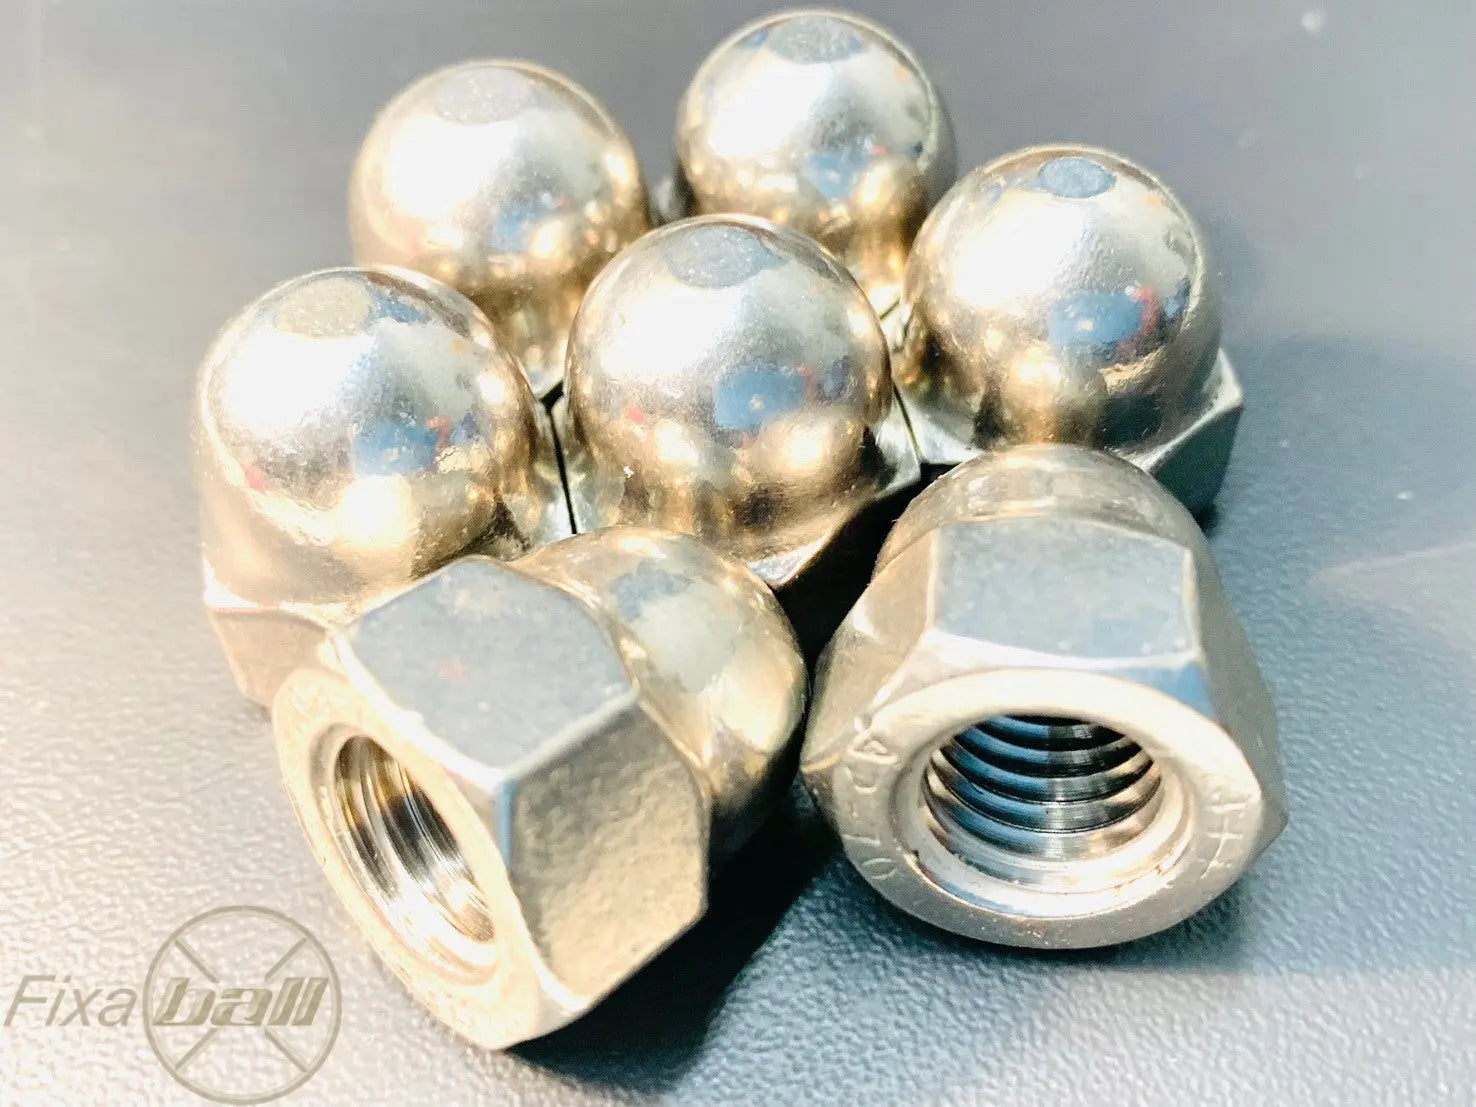 M3 - M24, Dome Nuts, High Type, A2/ 304 Stainless Steel, DIN 1587. Nuts M3 - M24, Dome Nuts, High Type, A2/ 304 Stainless Steel, DIN 1587. Dome Nuts